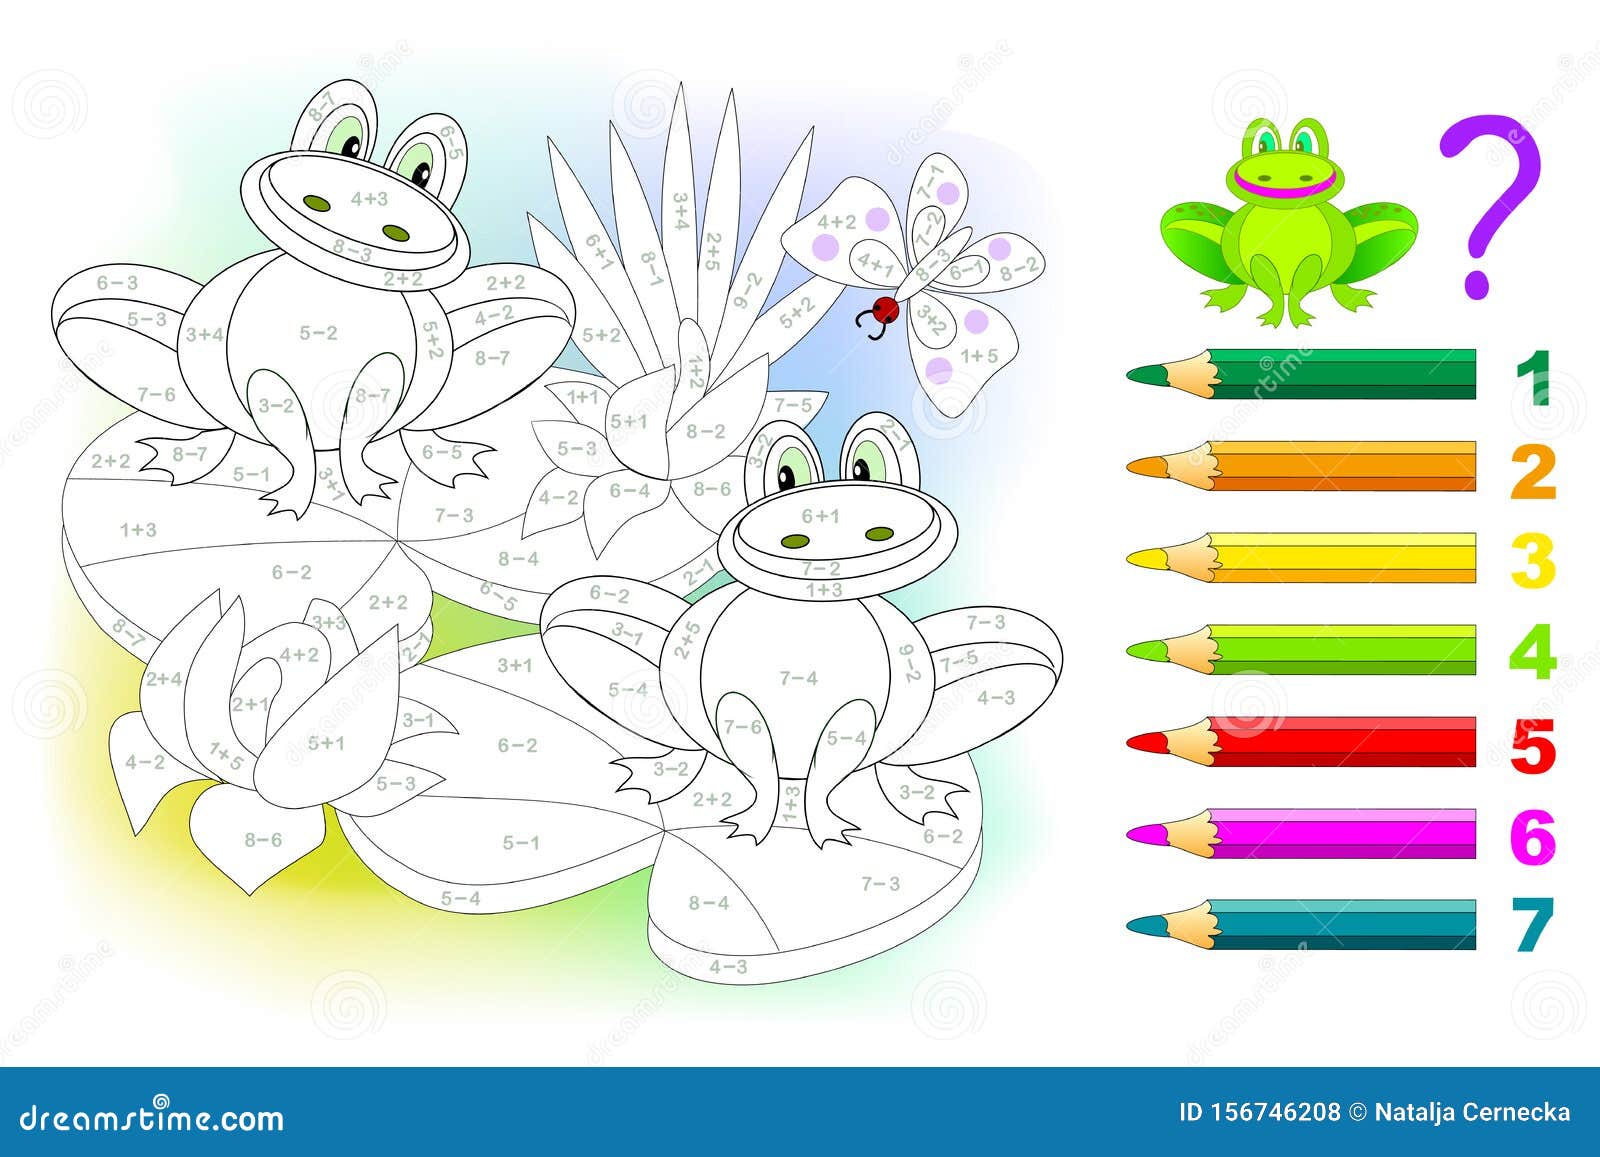 math education for children. coloring book. mathematical exercises on addition and subtraction. solve examples and paint frogs.